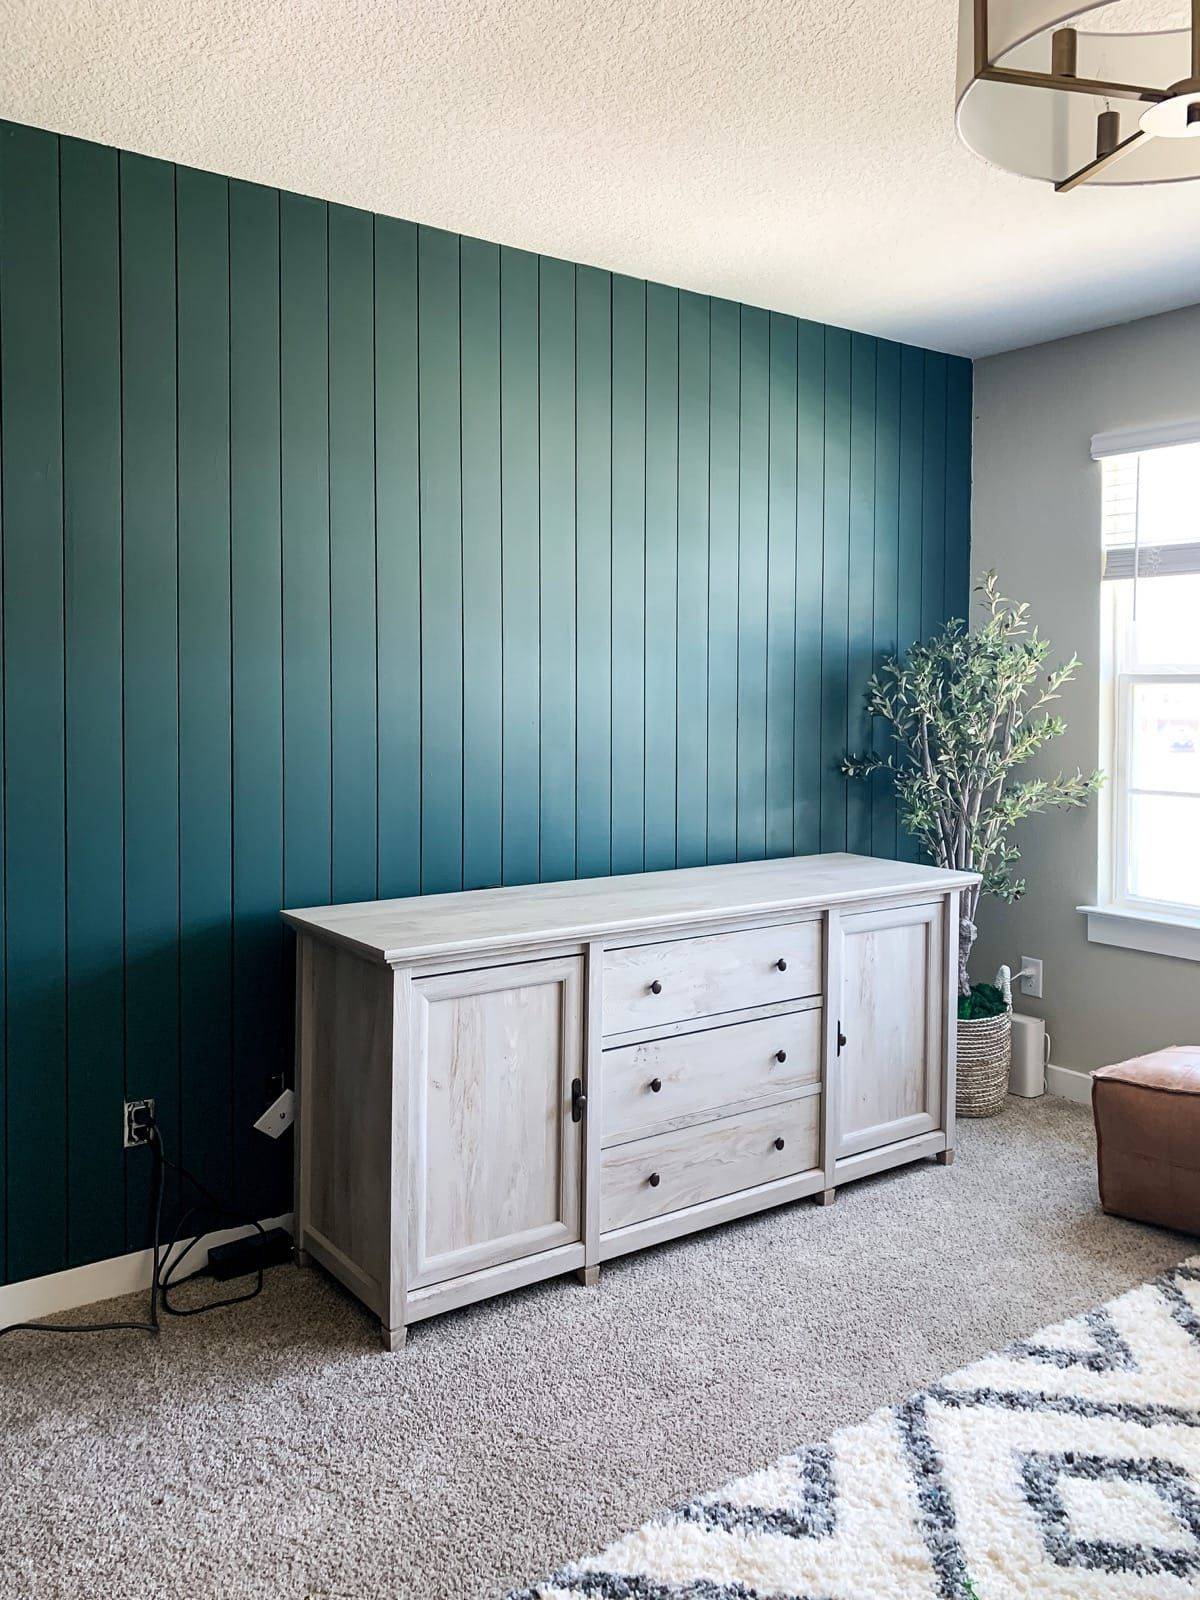 Vertically Installed Shiplap Wall